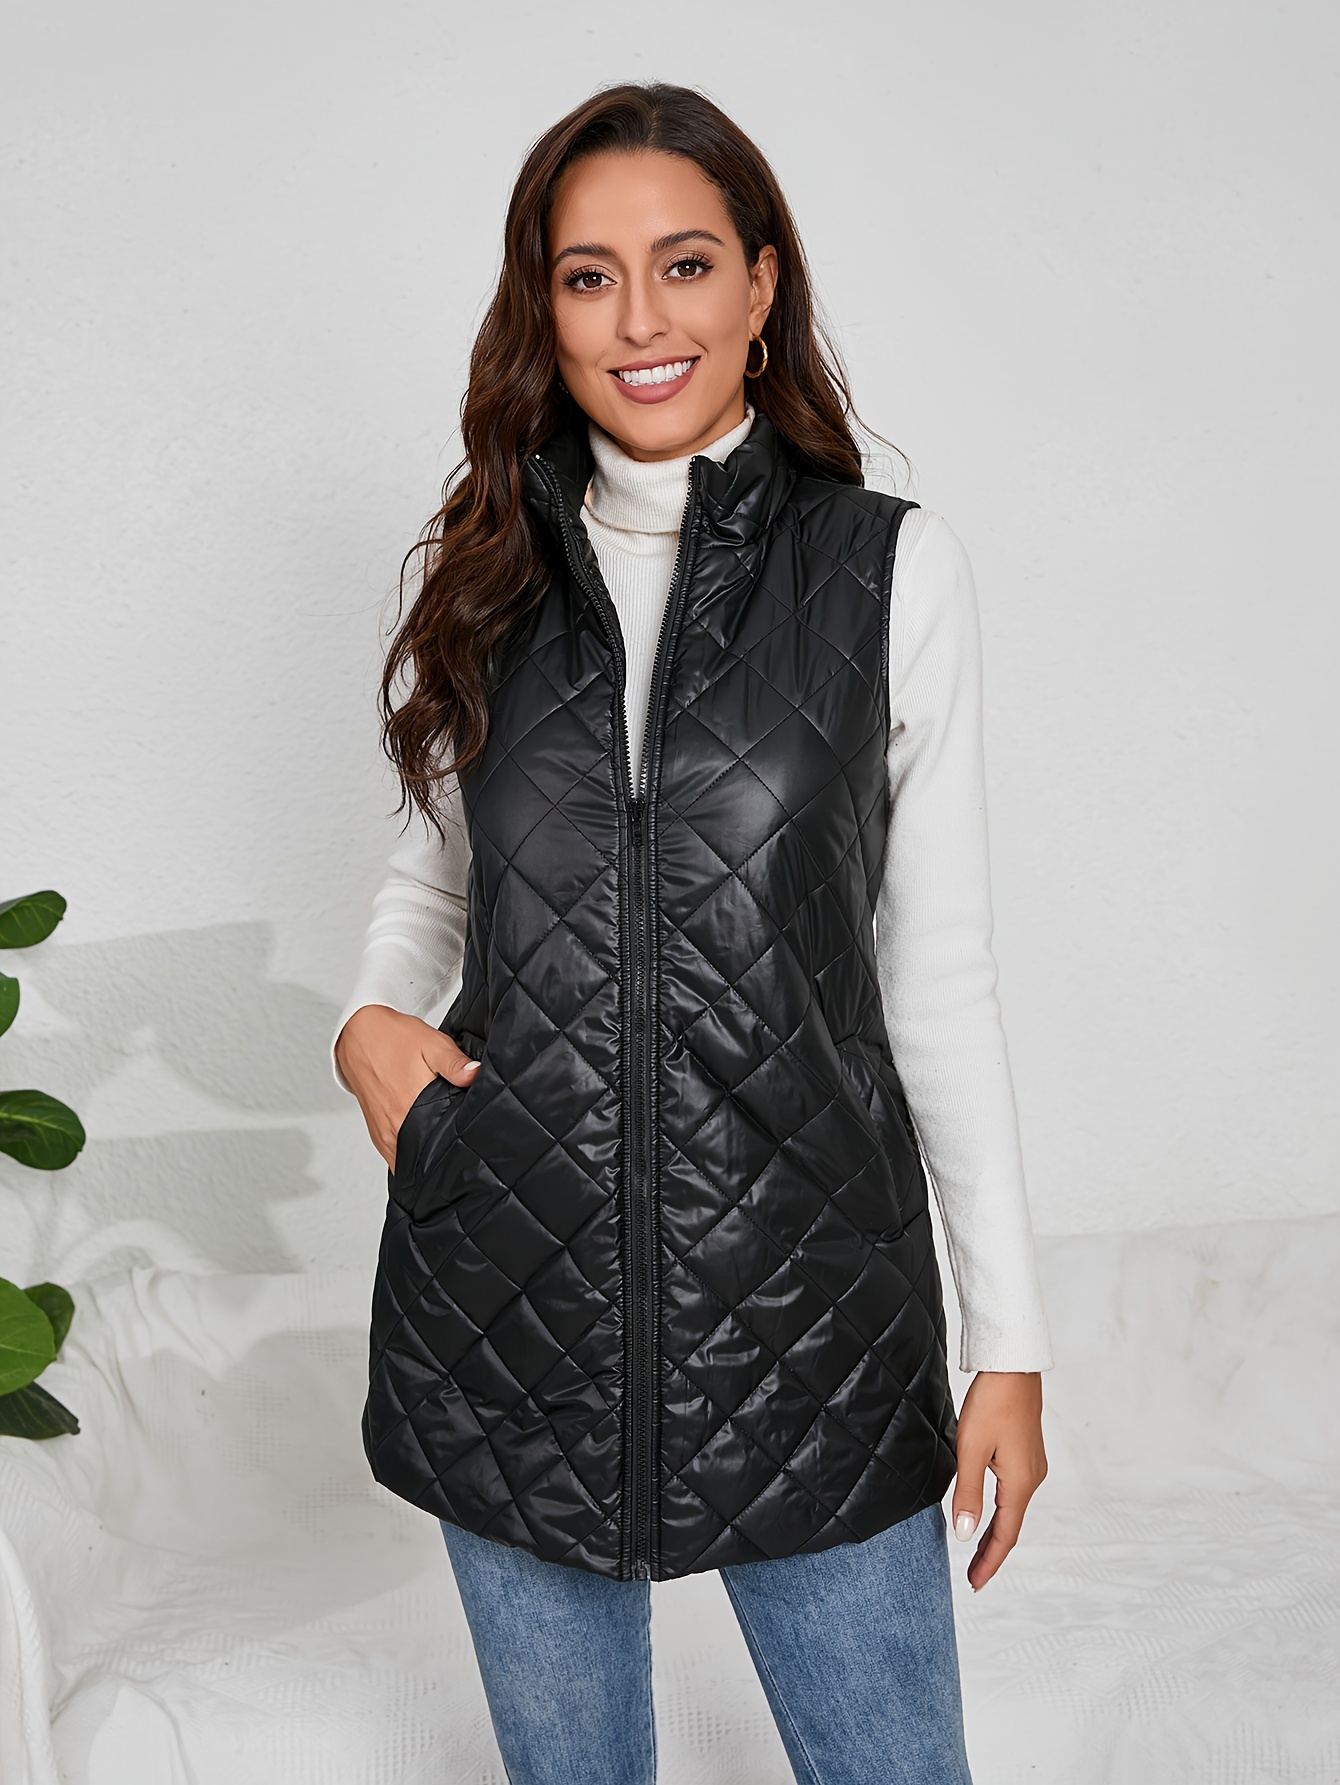 Women's Outwear - Jackets and Vests